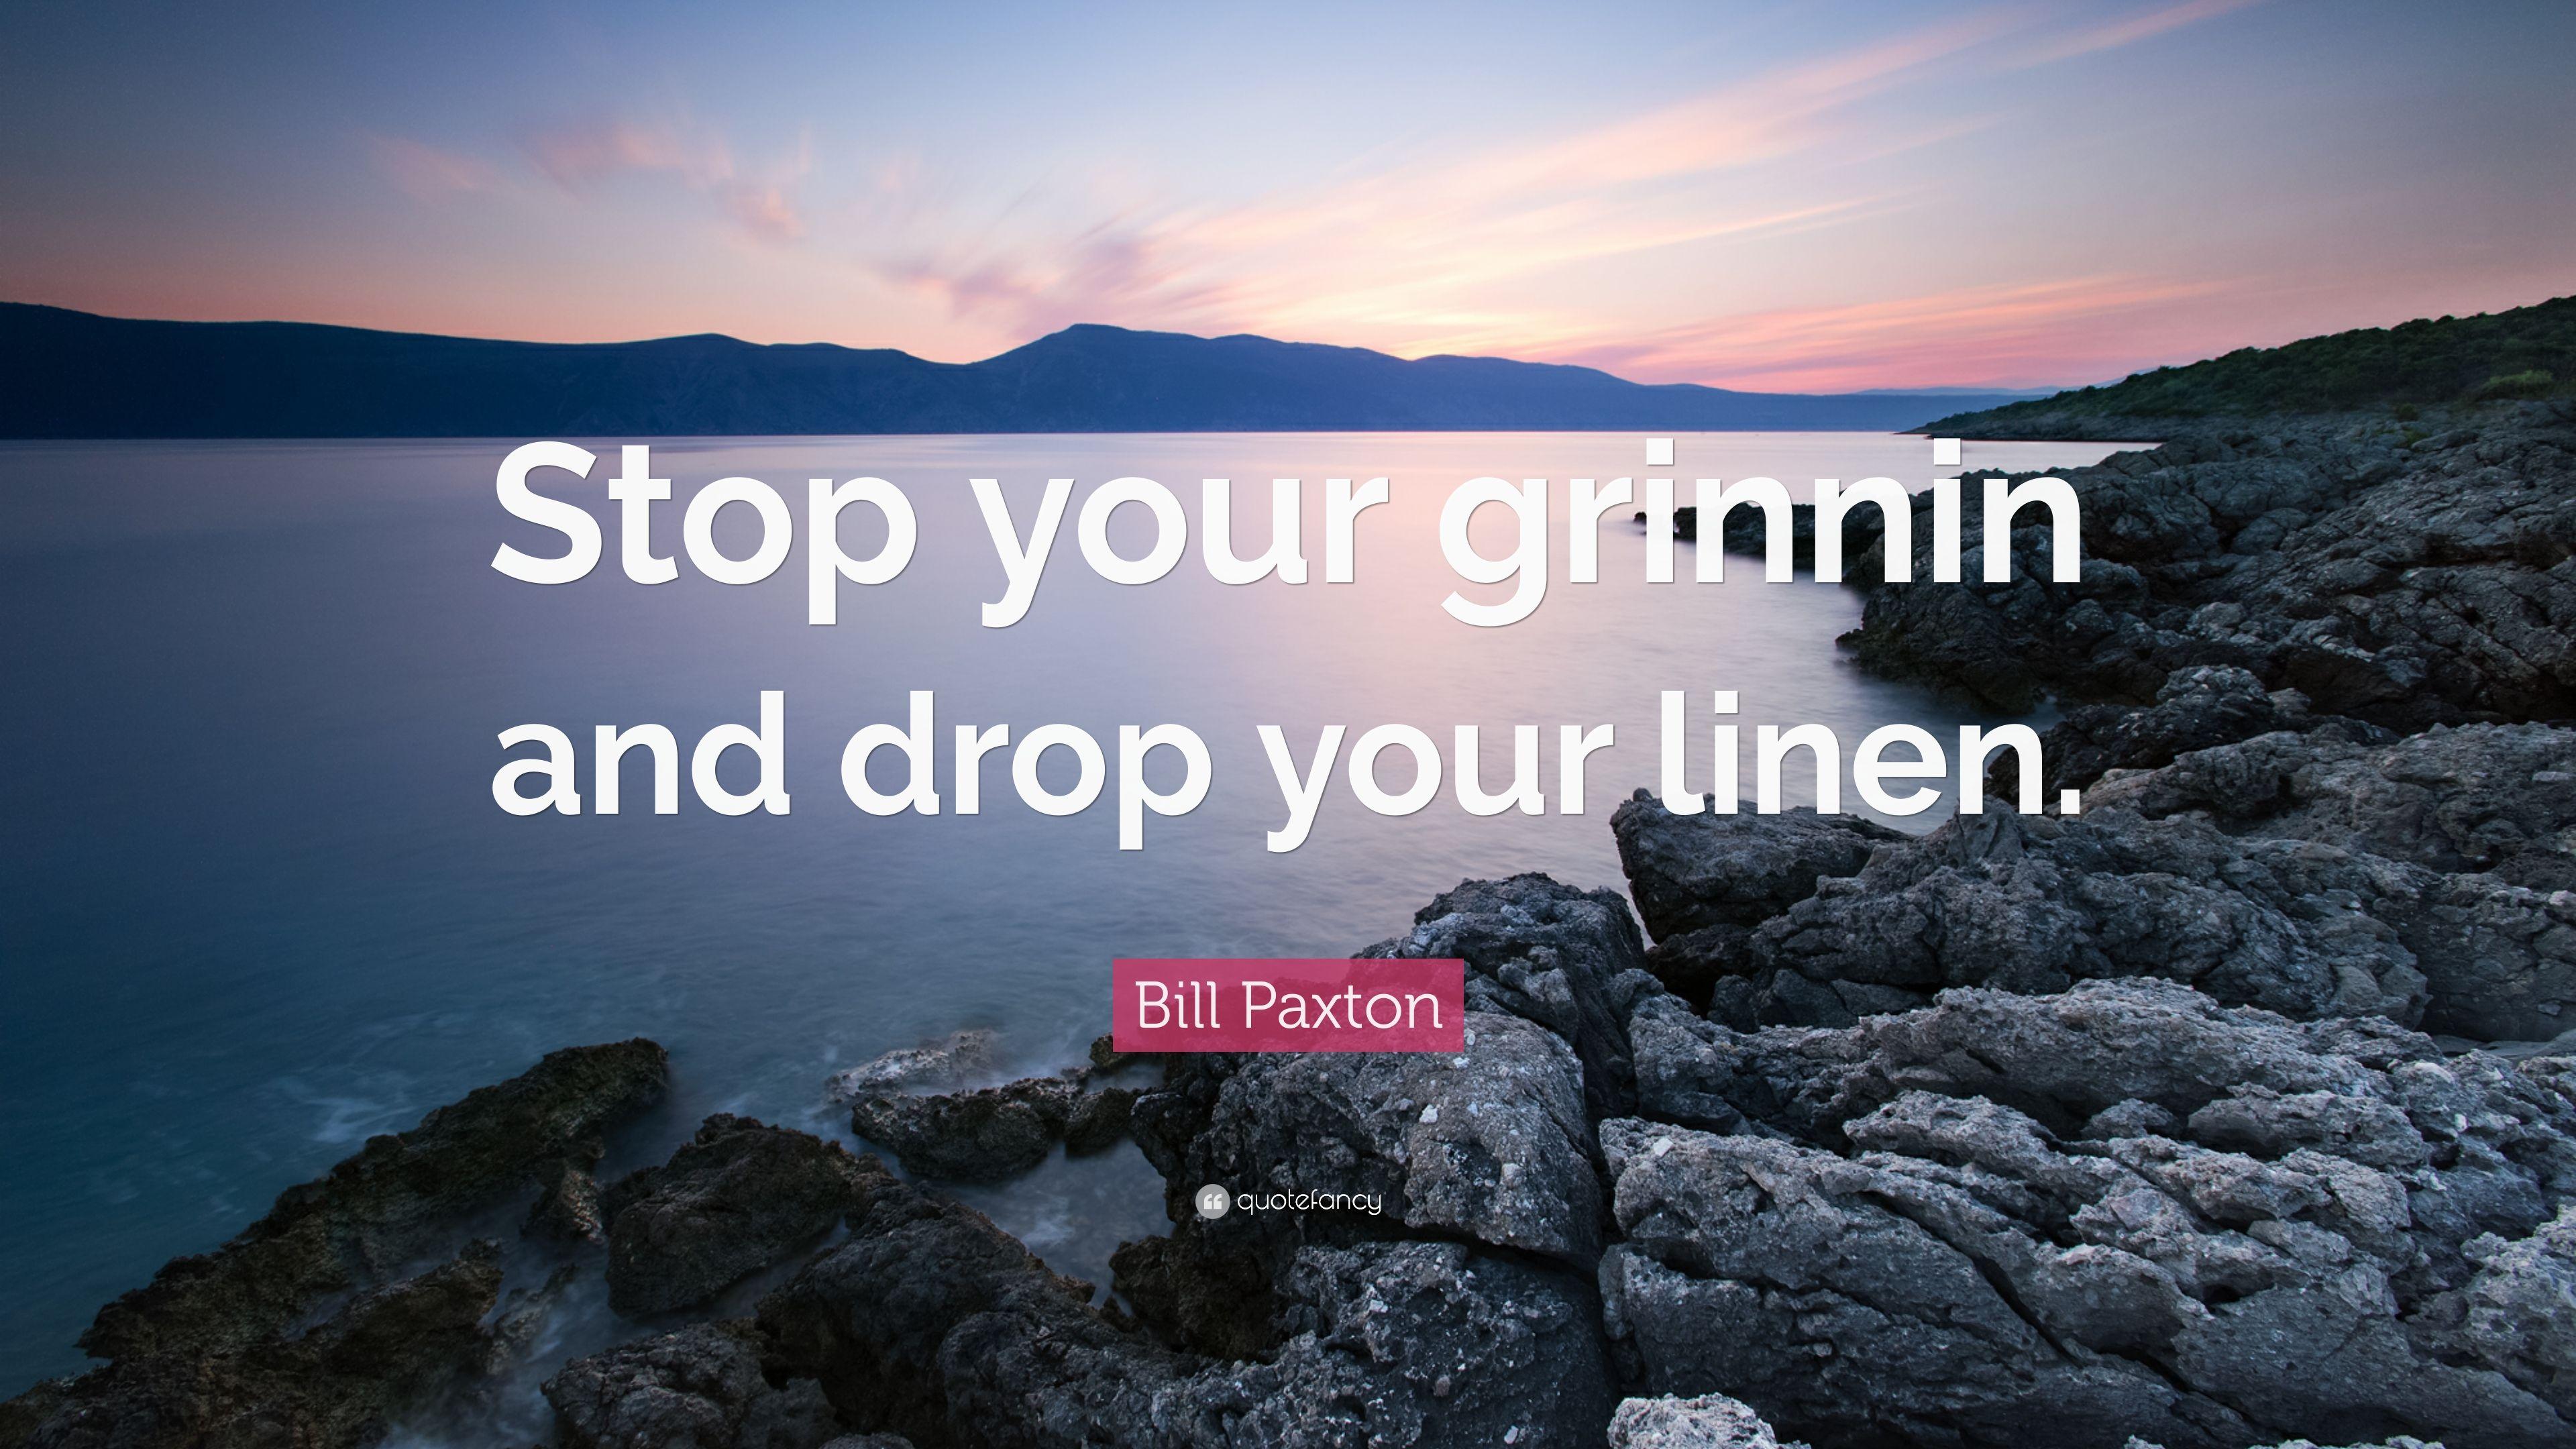 Bill Paxton Quote: “Stop your grinnin and drop your linen.” 9